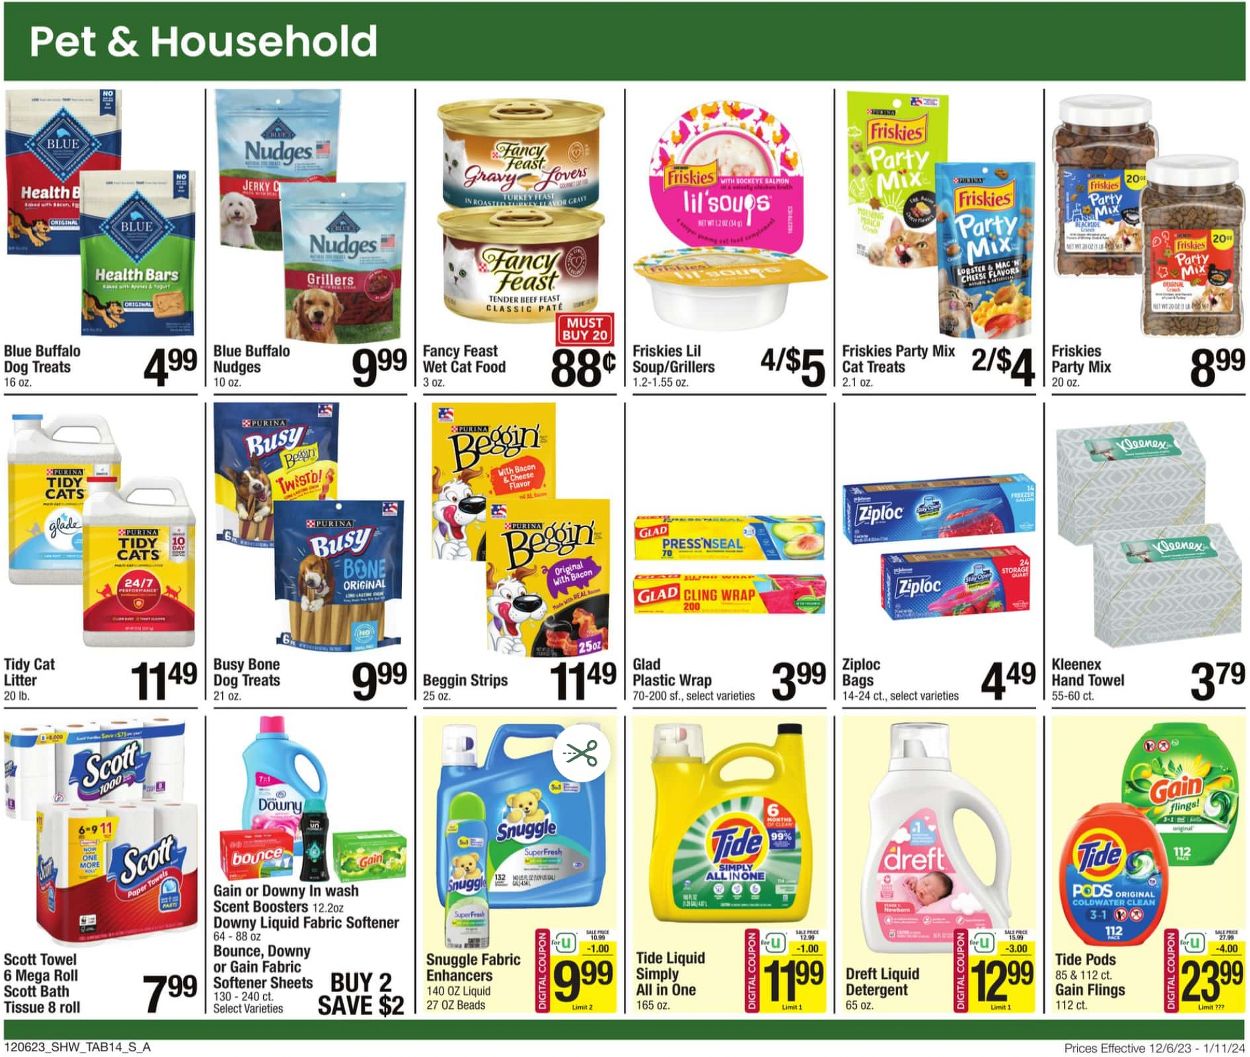 Shaw's July 2024 Weekly Sales, Deals, Discounts and Digital Coupons.